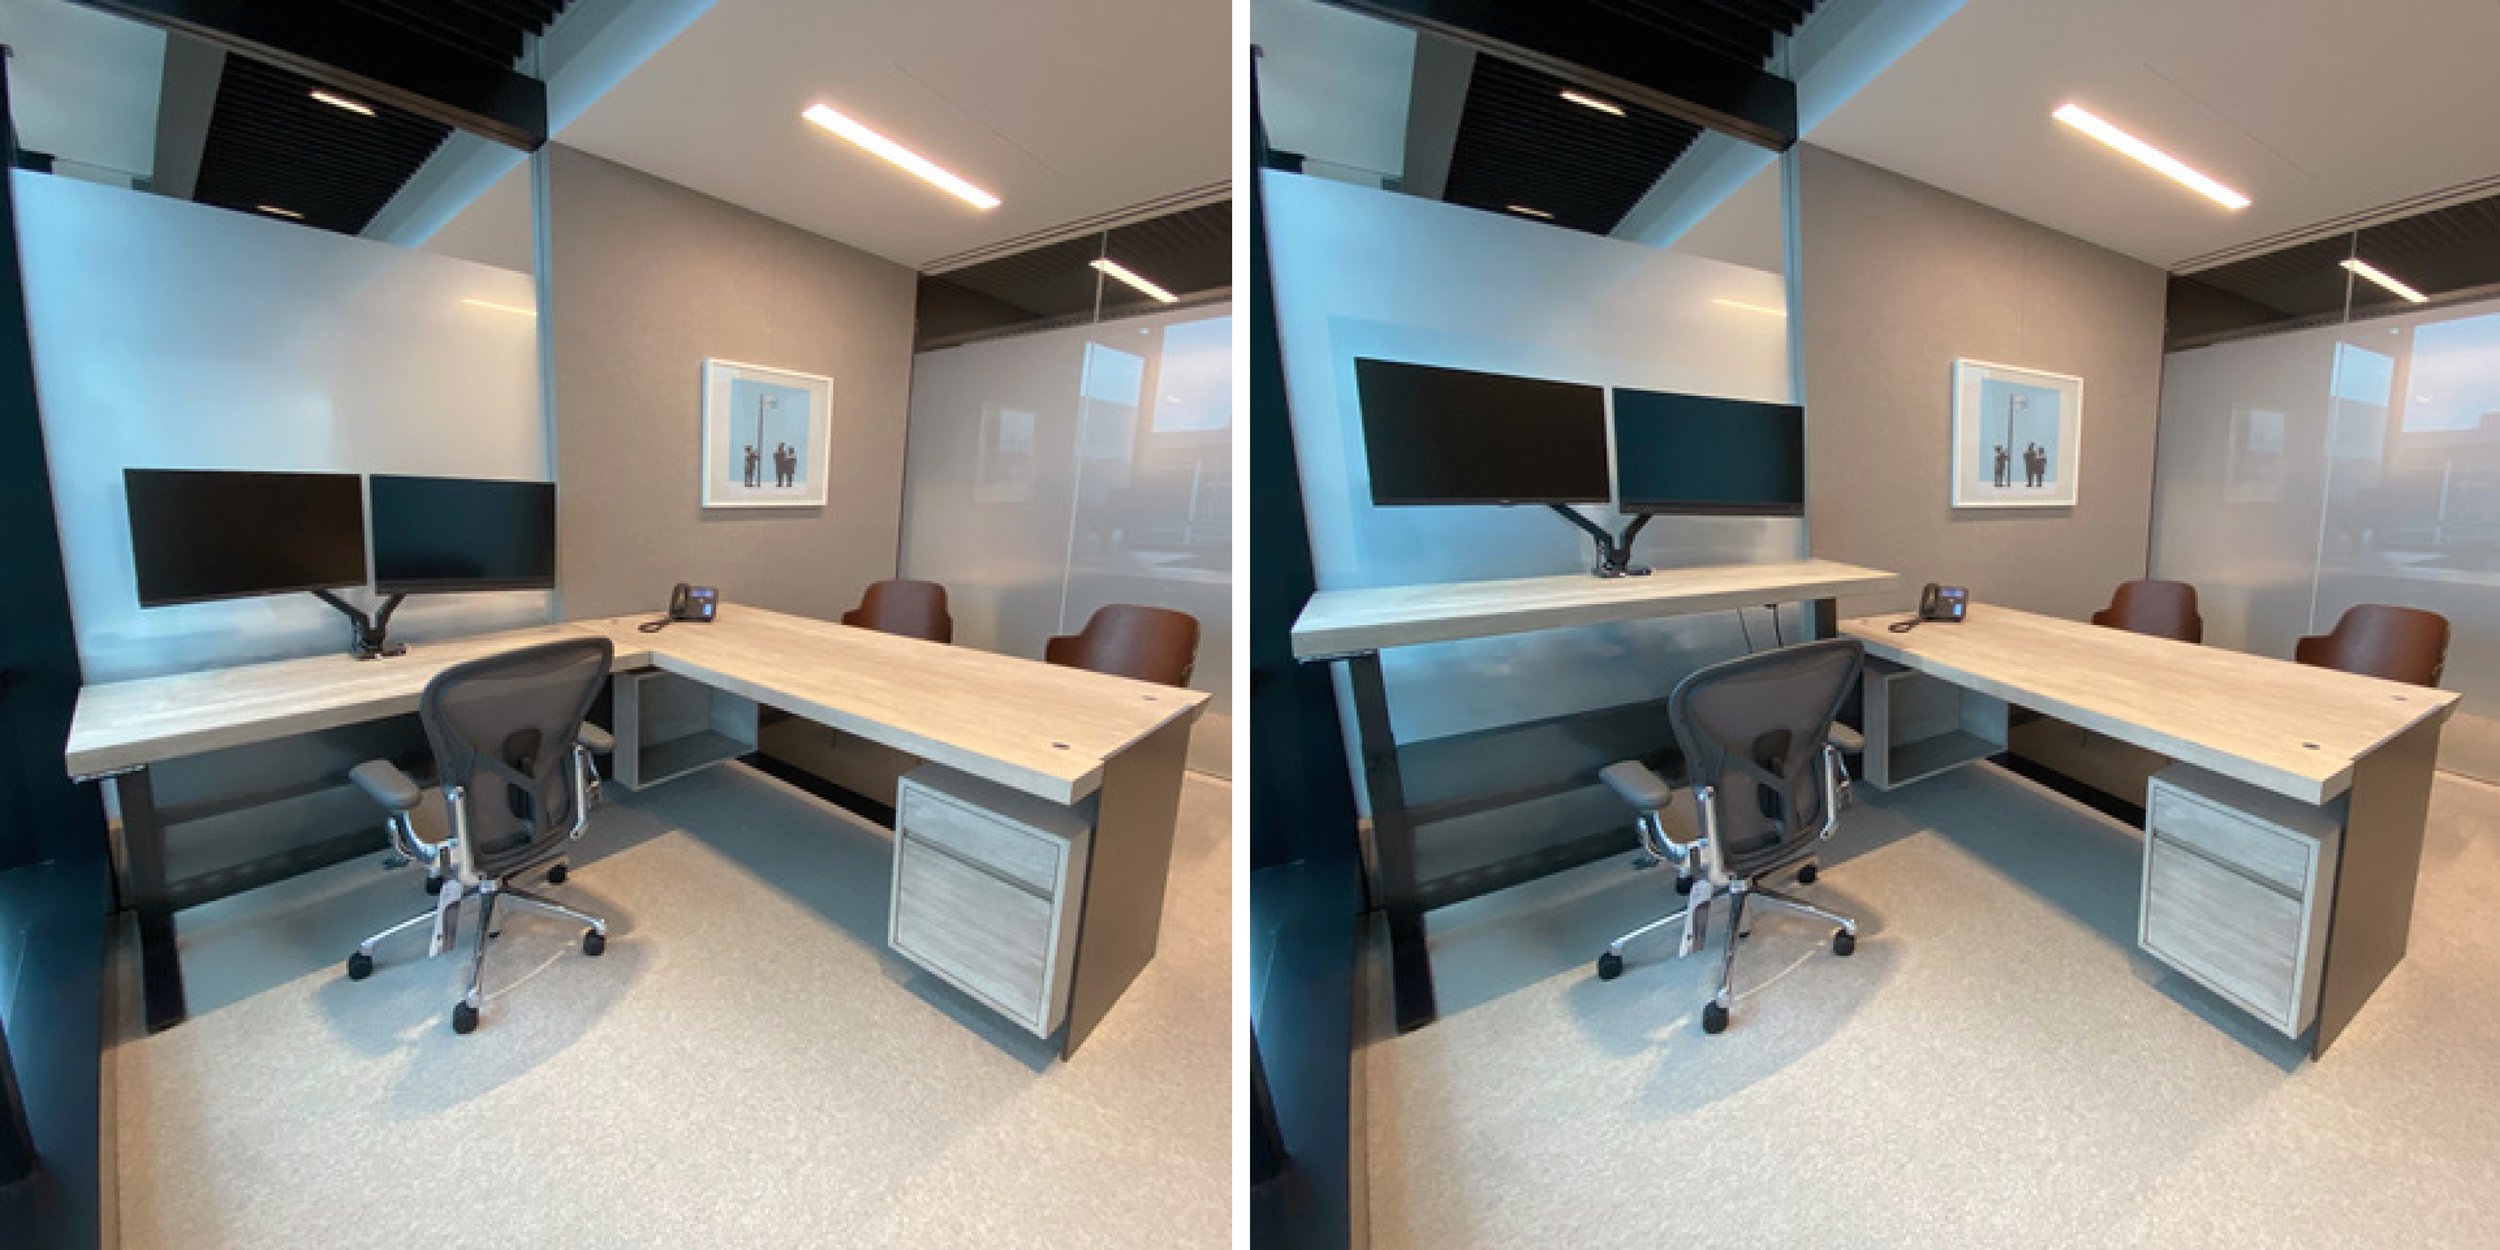 L-SHAPED, MULTI-SURFACE, ADJUSTABLE HEIGHT DESKS FOR THE EXECUTIVE WORKSTATIONS